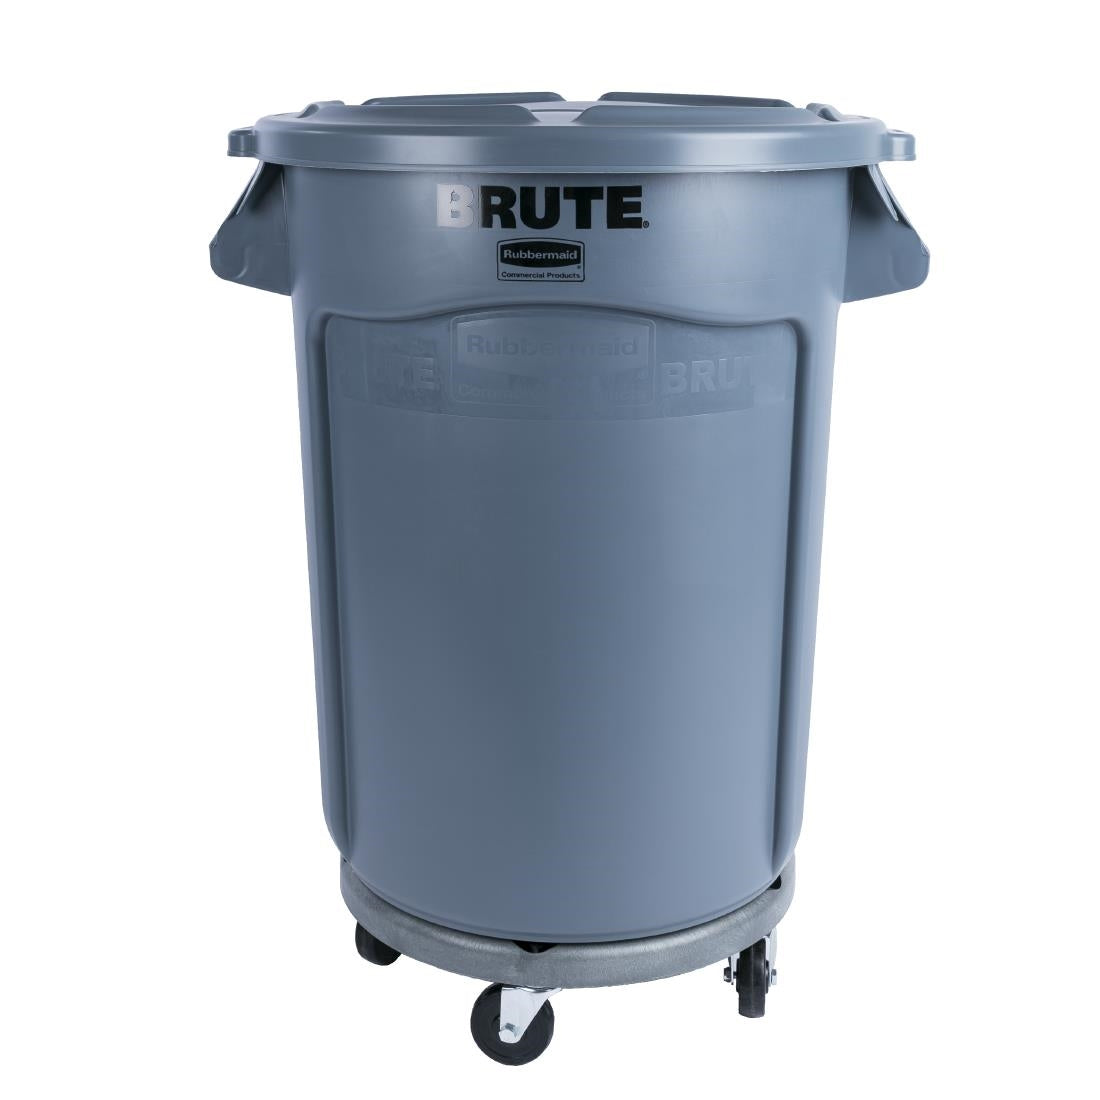 L640 Rubbermaid Brute Utility Container